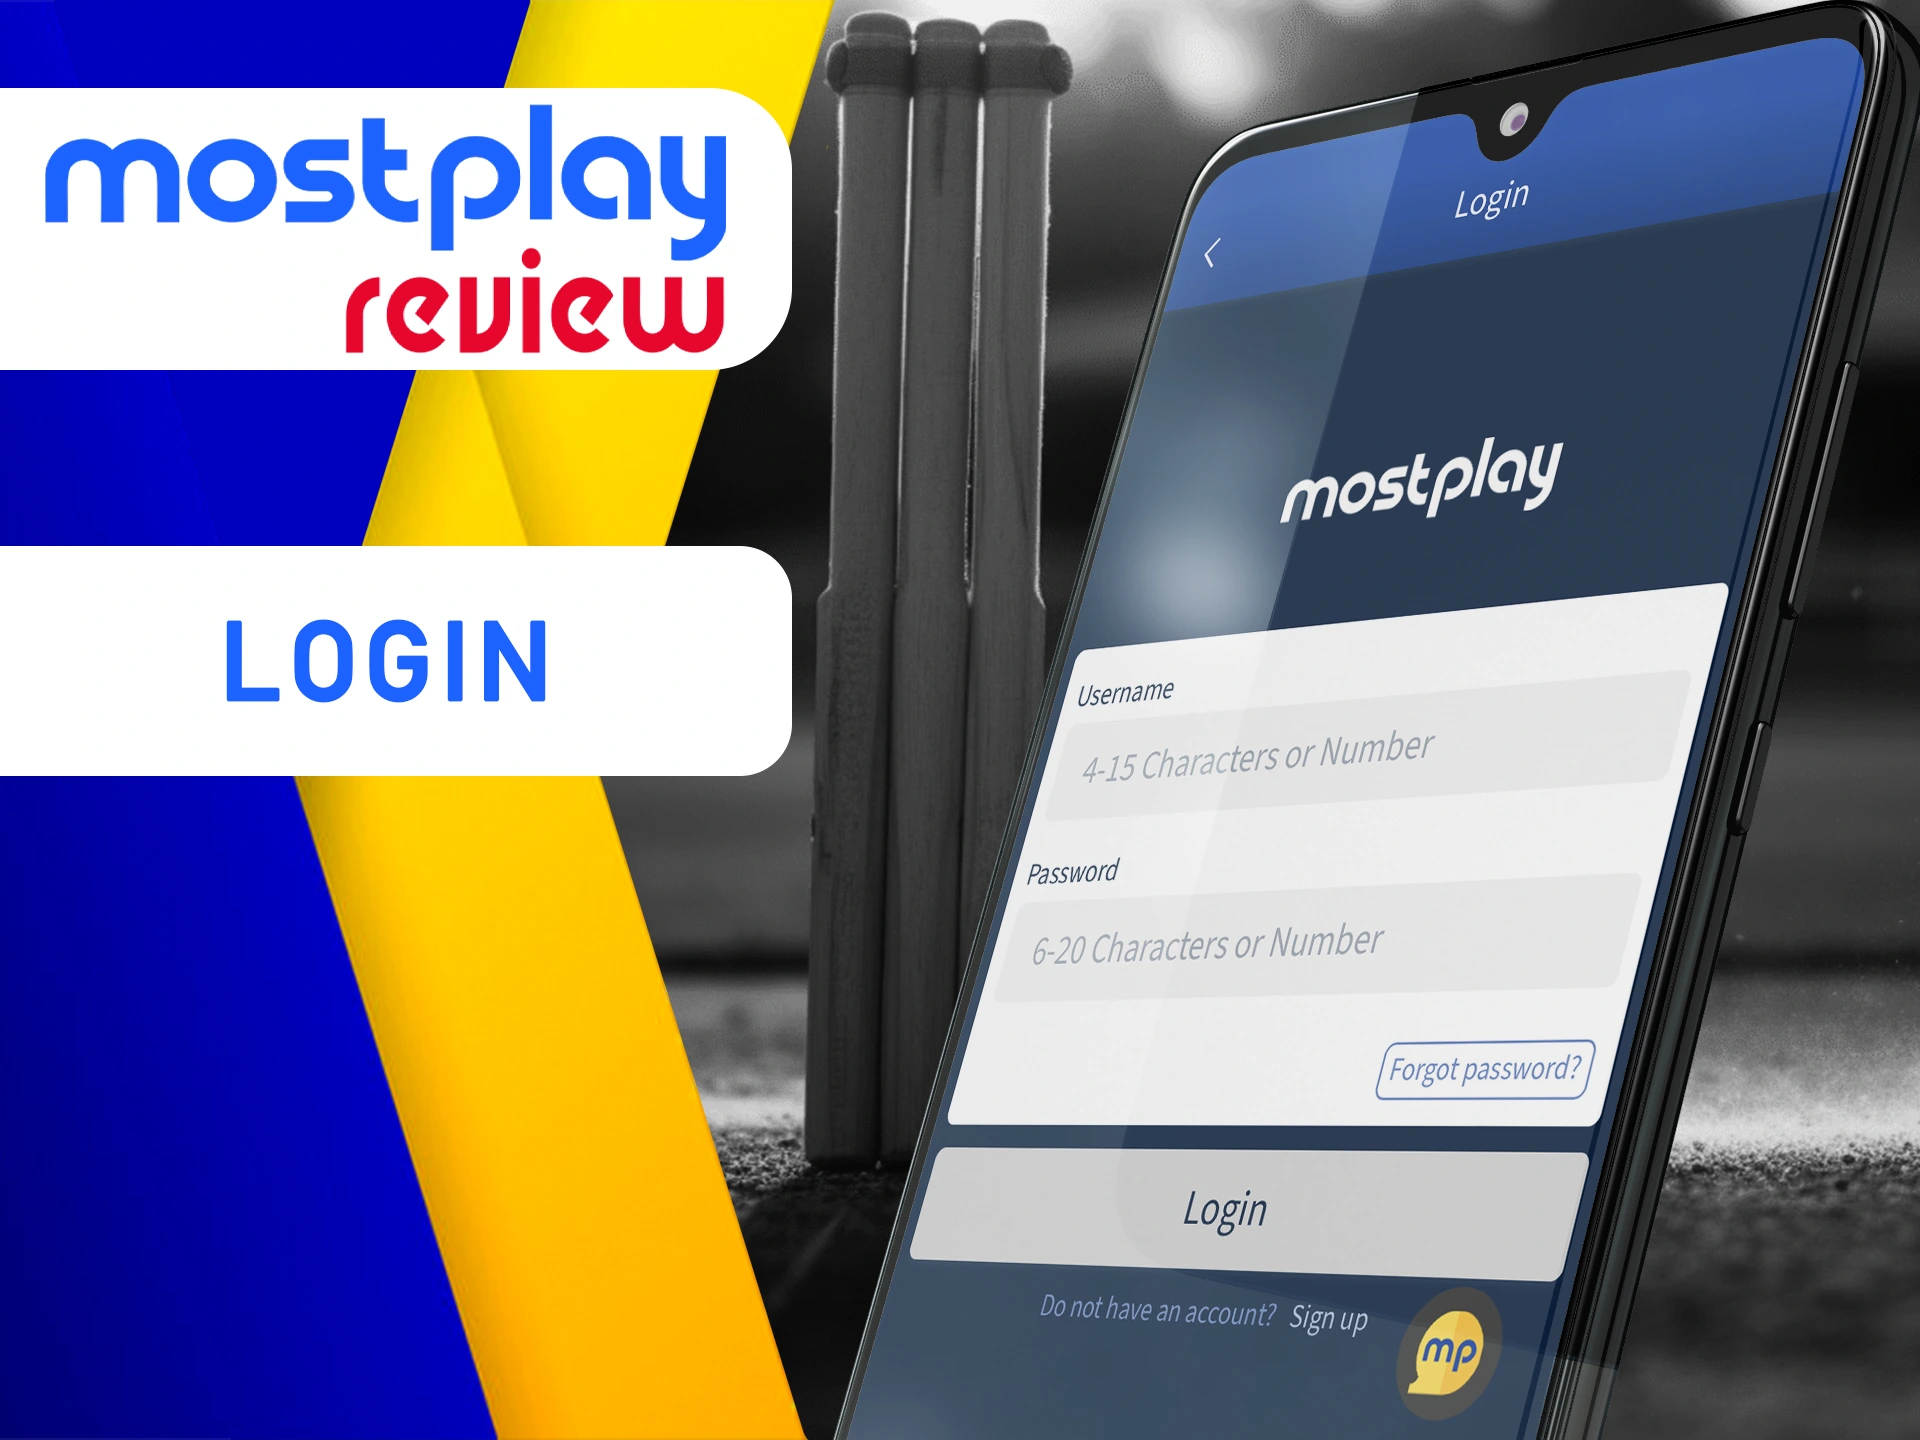 Log in using your Mostplay account.